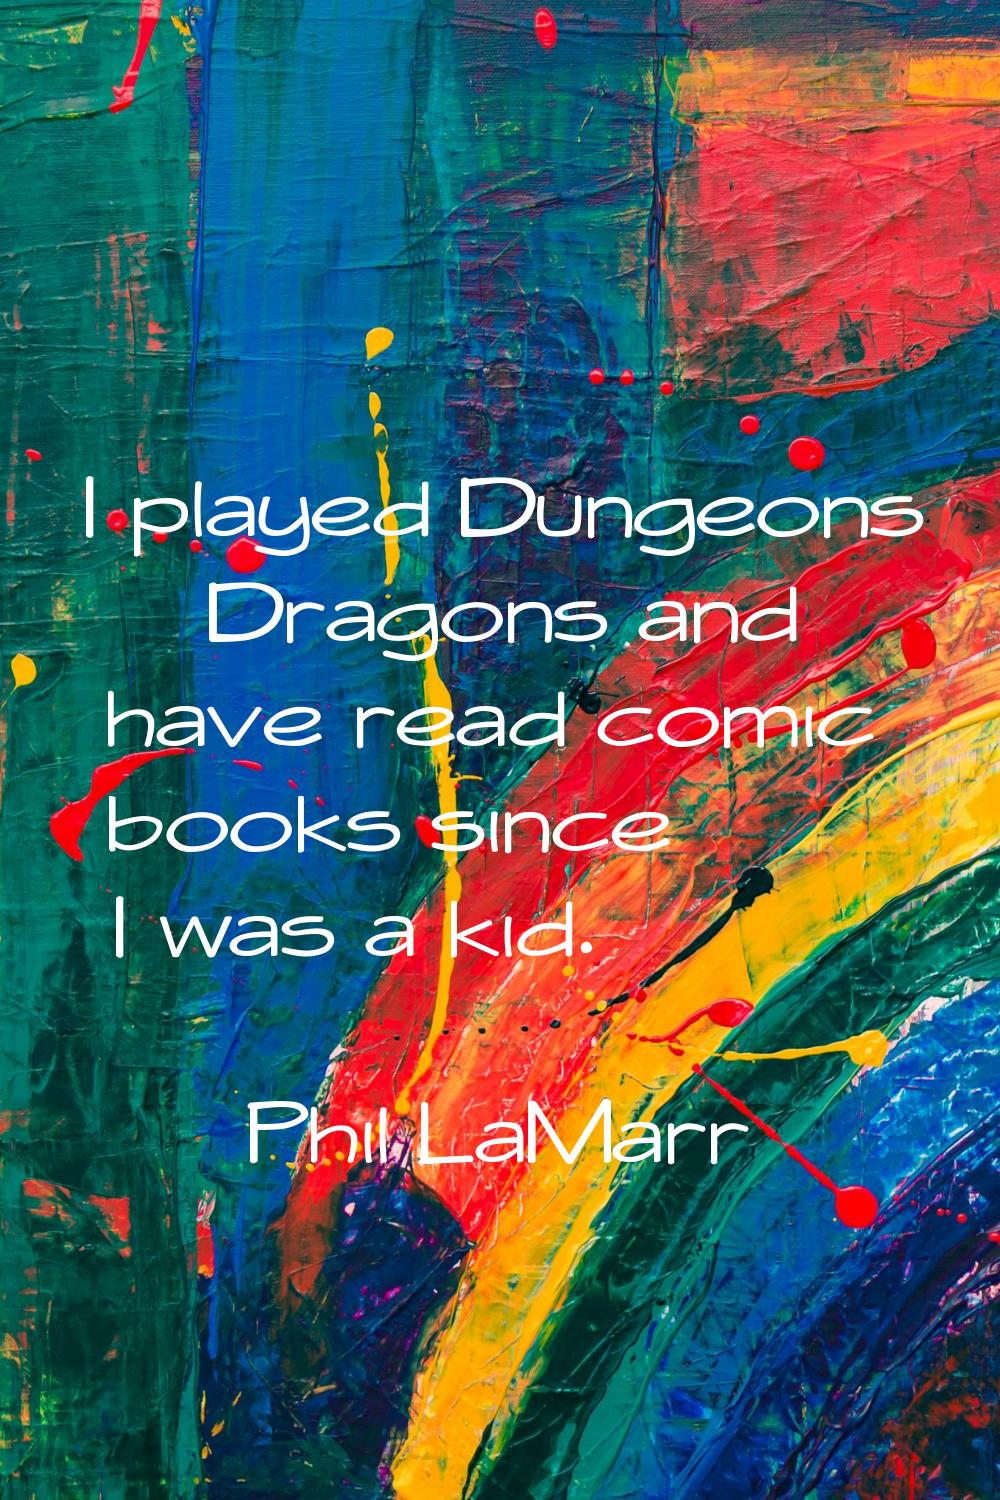 I played Dungeons & Dragons and have read comic books since I was a kid.